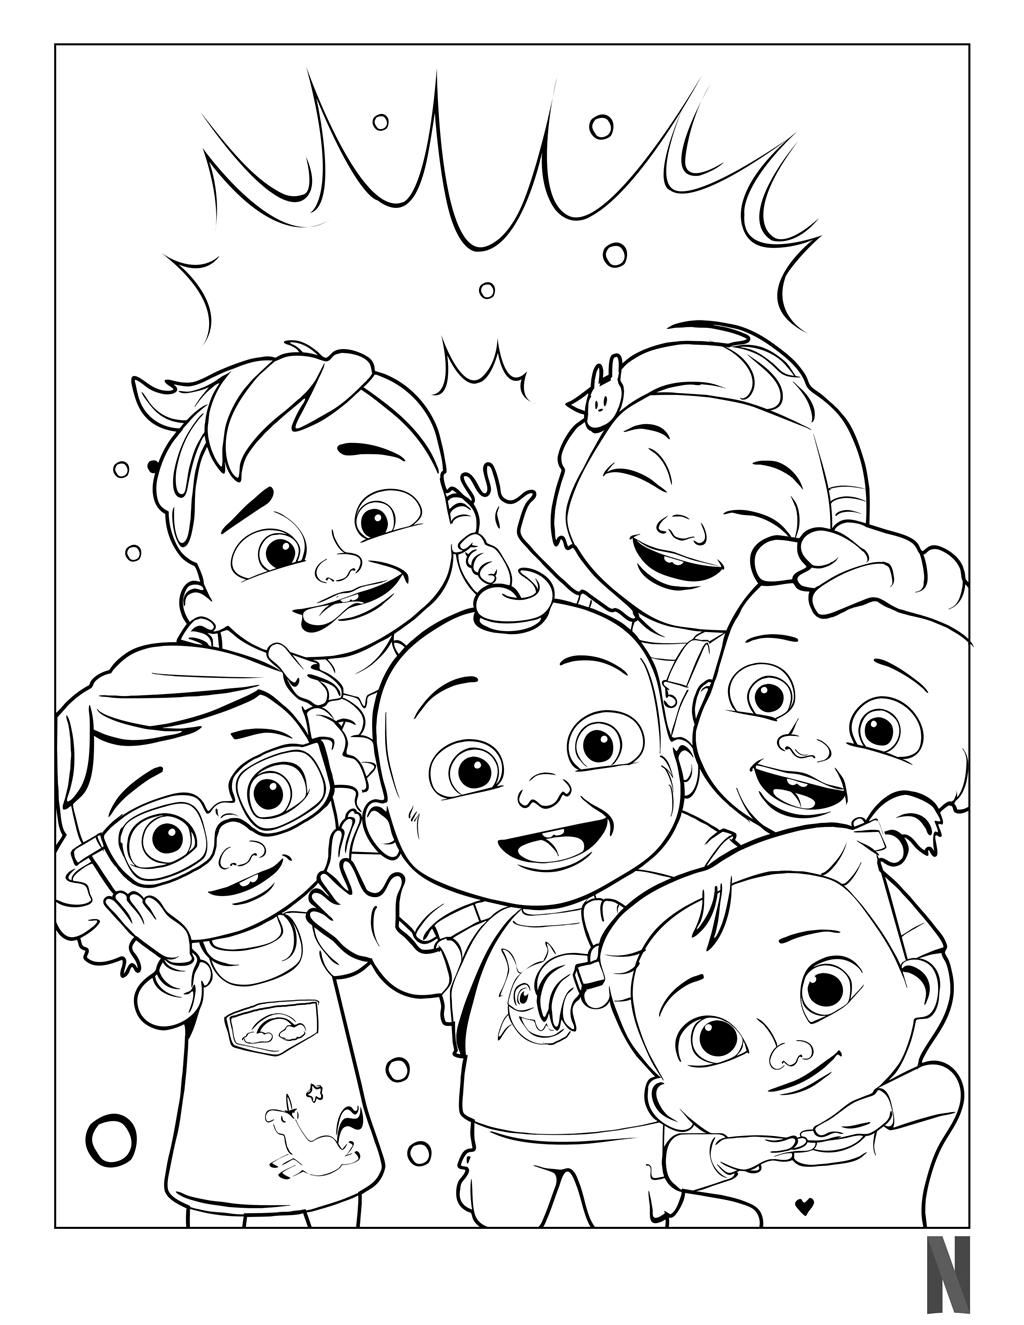 Cocomelon coloring pages characters birthday coloring pages coloring pages inspirational rtoon coloring pages